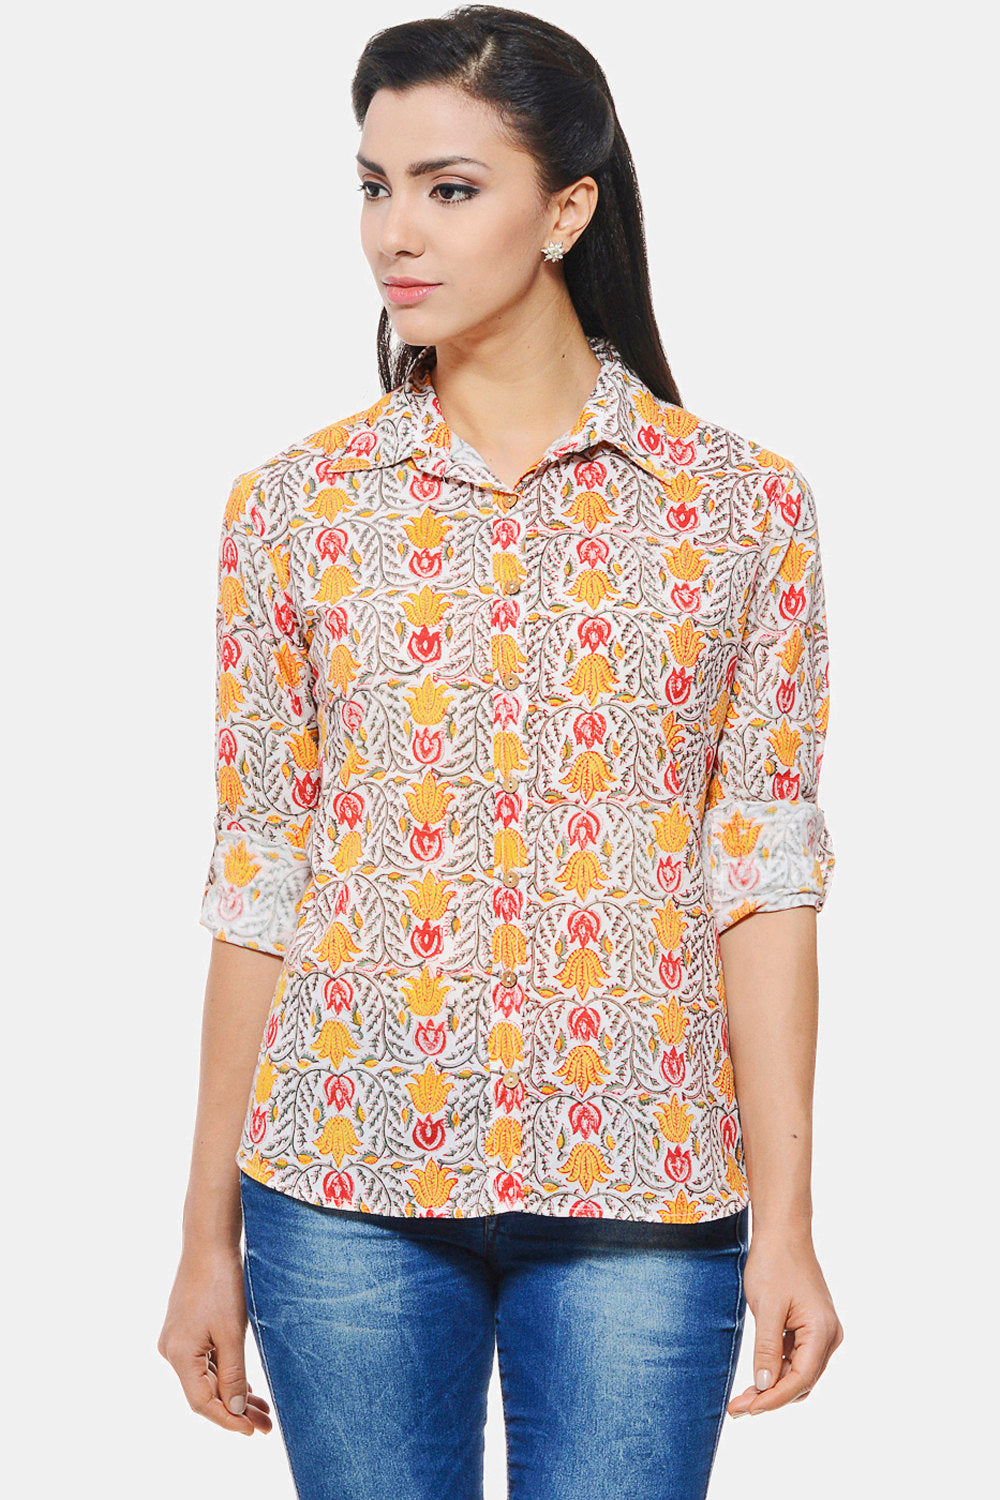 Hand block printed Shirt with yellow and red floral design